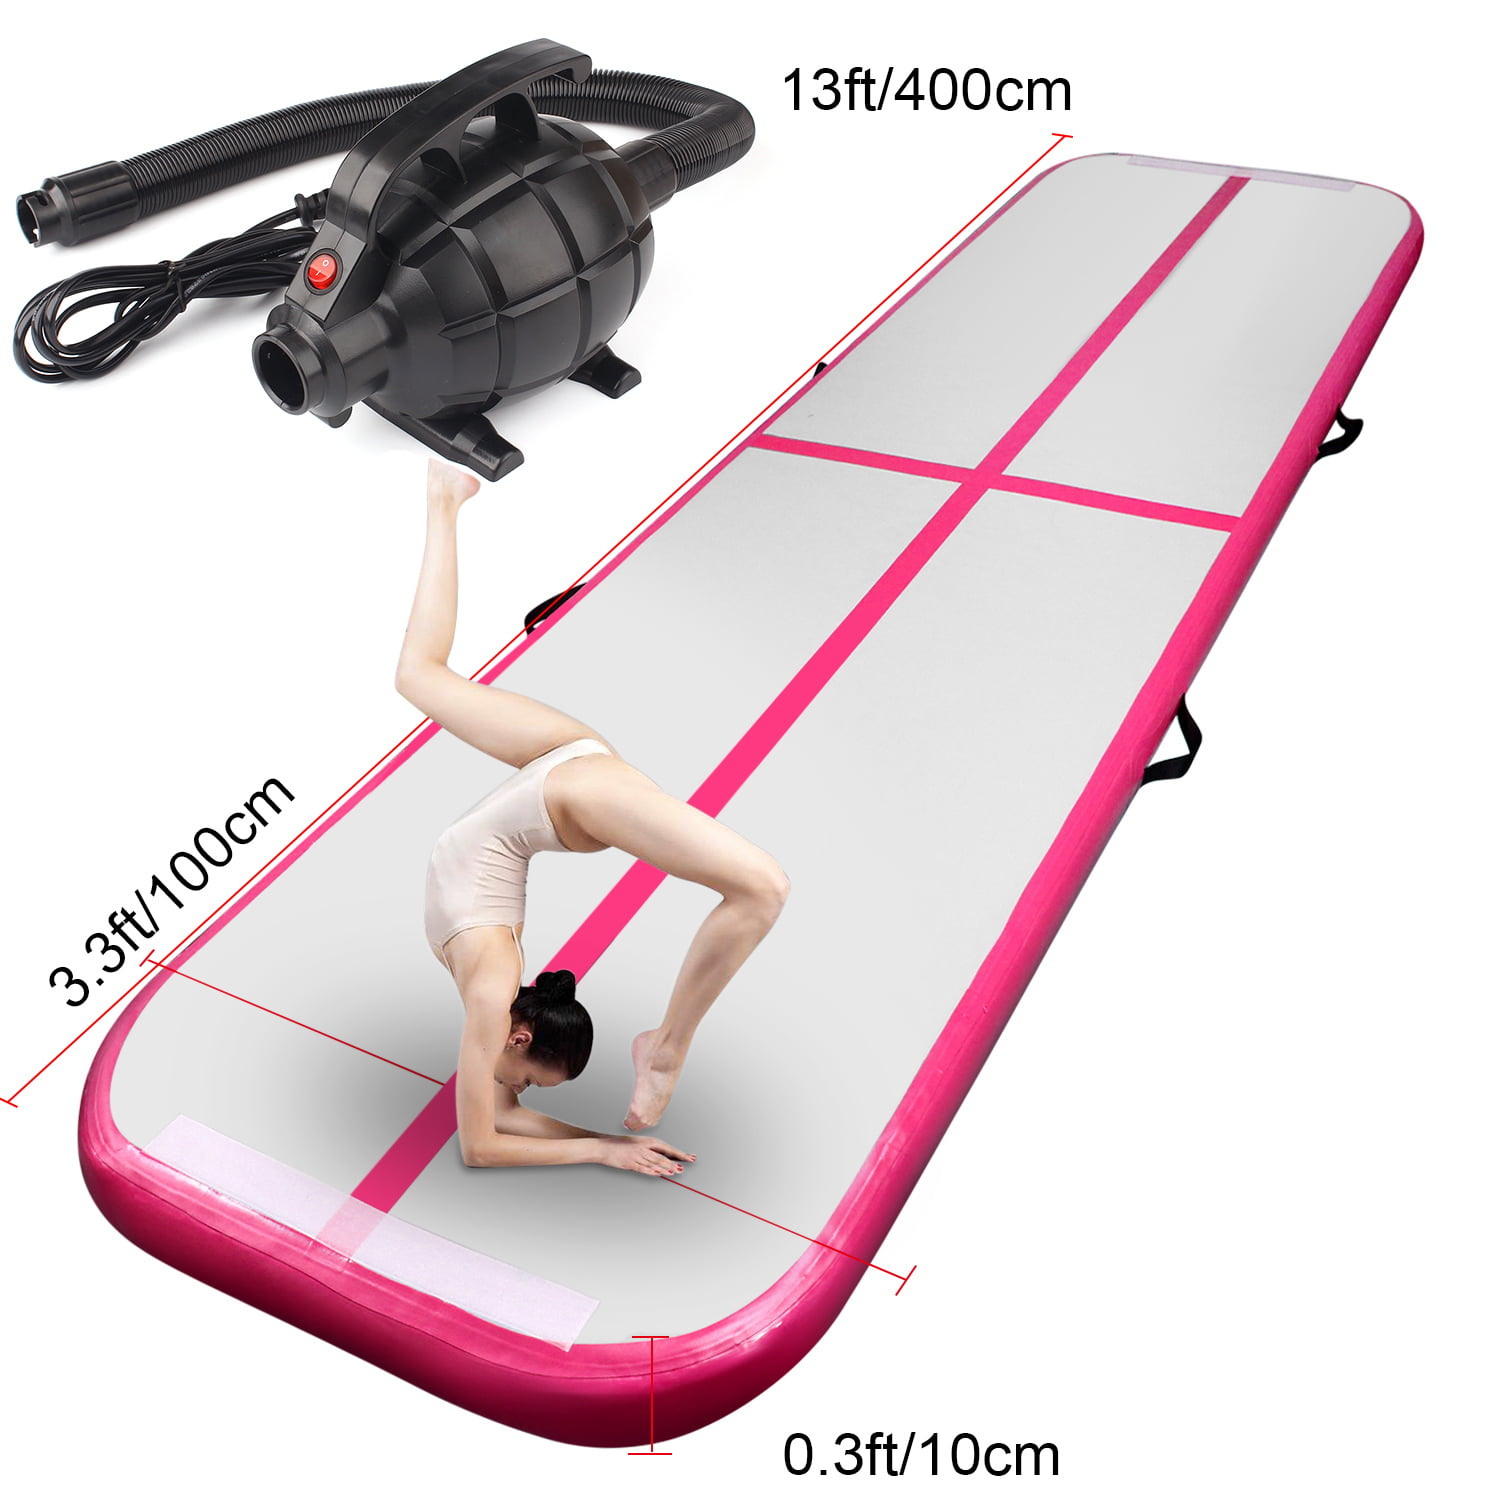 FBSPORT 10ft/13ft/16ft/20ft/23ft/26ft Inflatable Gymnastics Air Track Tumbling Mat Air Track Floor Mats with Electric Air Pump for Home Use/Training/Cheerleading/Beach/Park